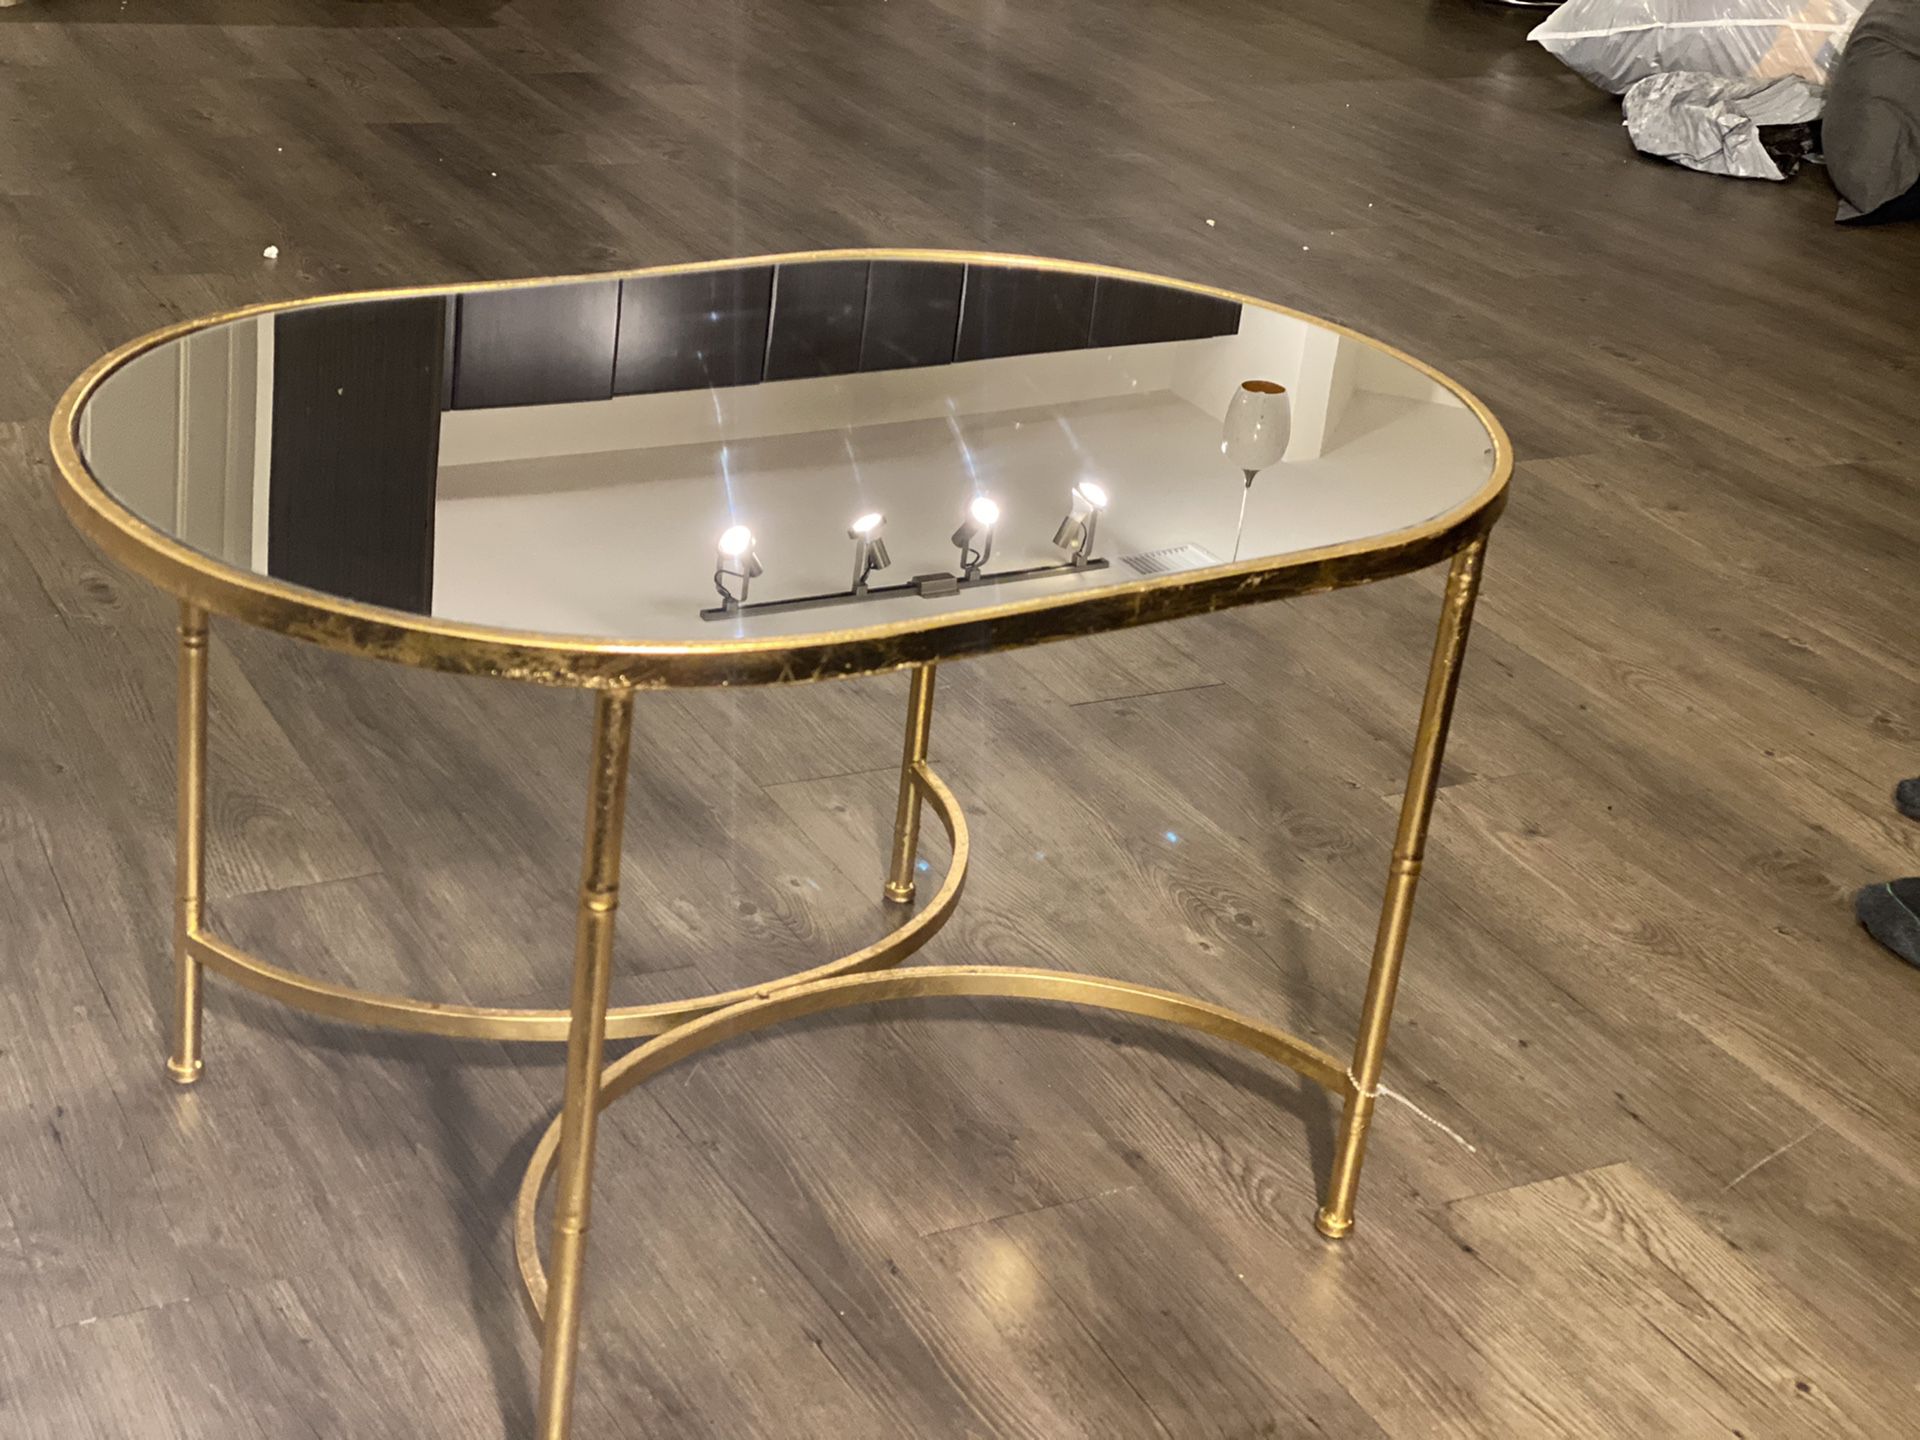 New Gold mirror table